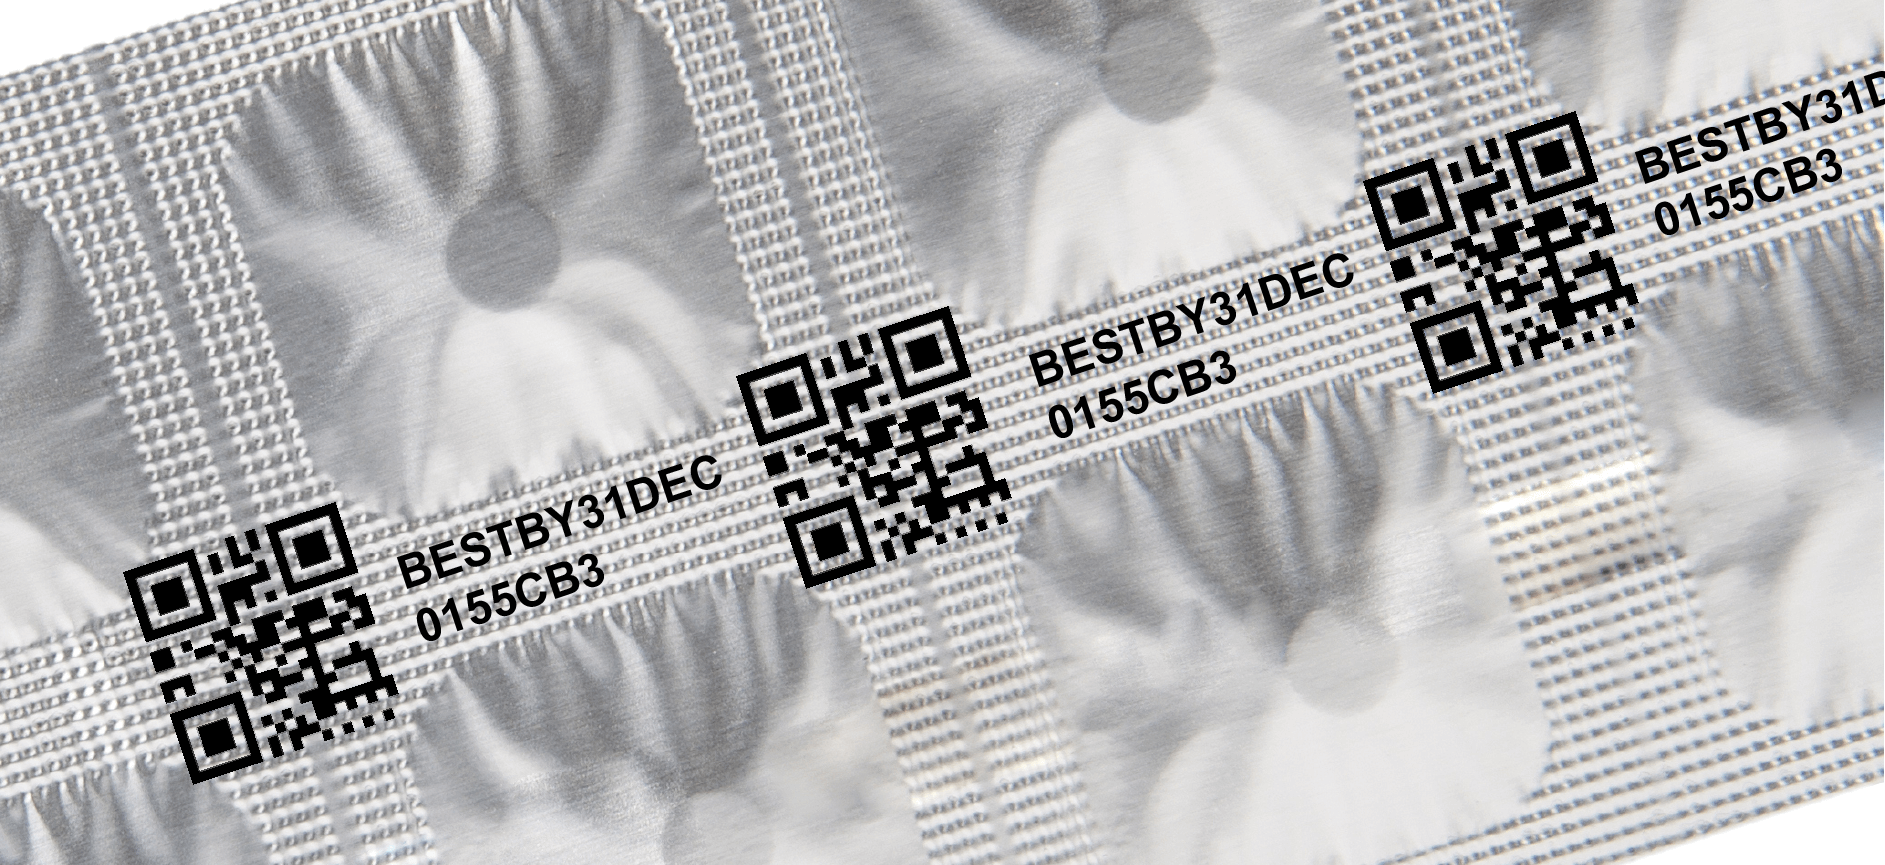 foil pharmaceutical packaging with bar code and expiration date